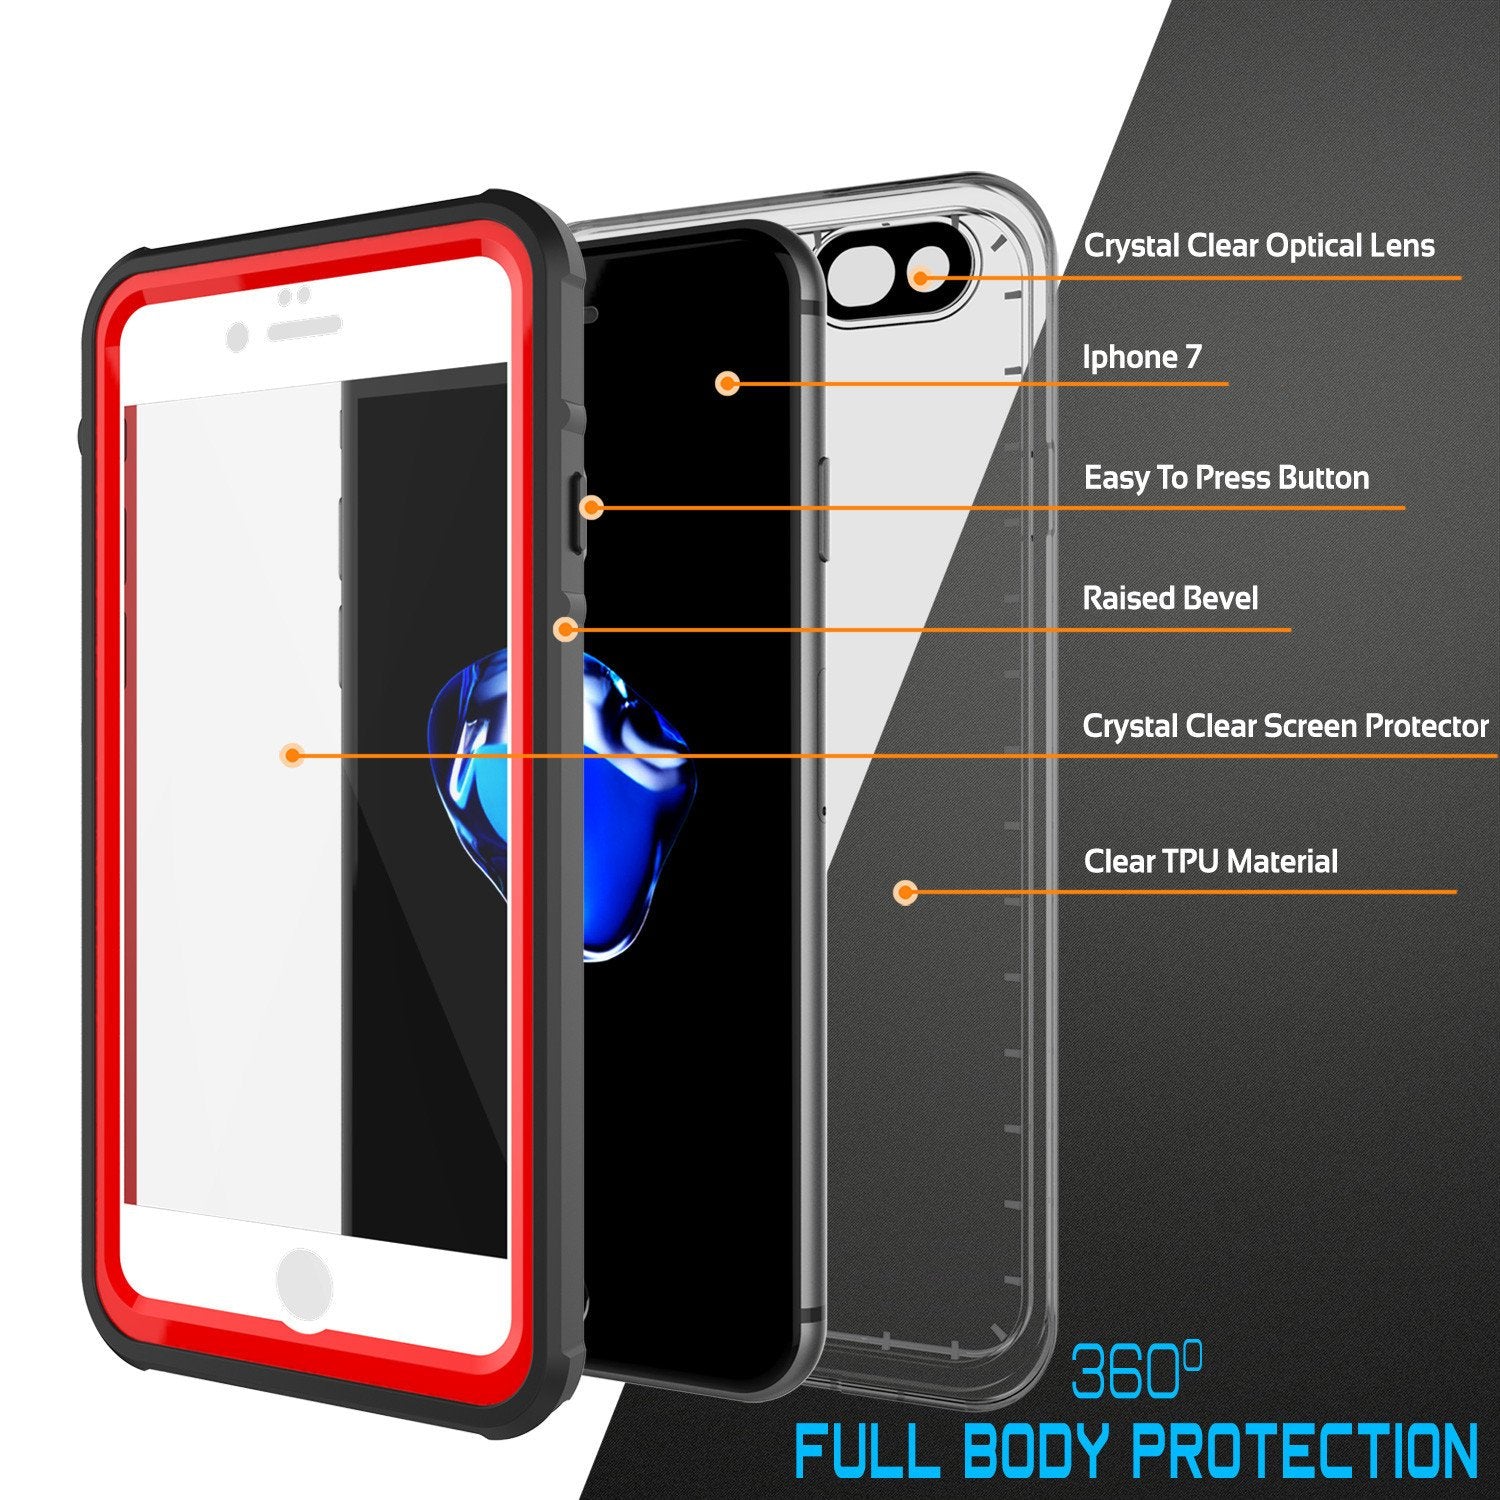 Apple iPhone 7 Waterproof Case, PUNKcase CRYSTAL Red W/ Attached Screen Protector  | Warranty